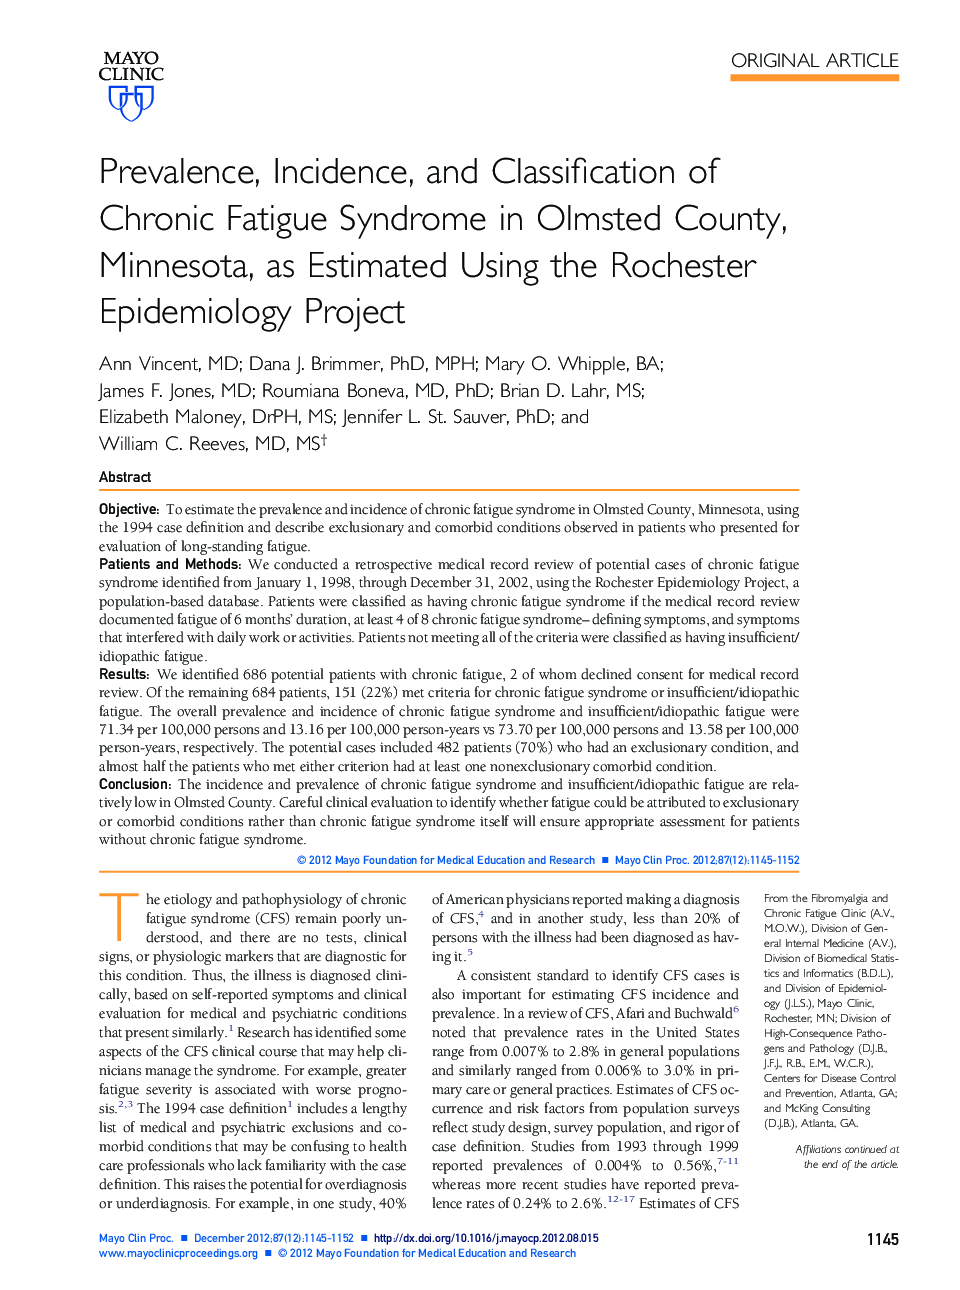 Prevalence, Incidence, and Classification of Chronic Fatigue Syndrome in Olmsted County, Minnesota, as Estimated Using the Rochester Epidemiology Project